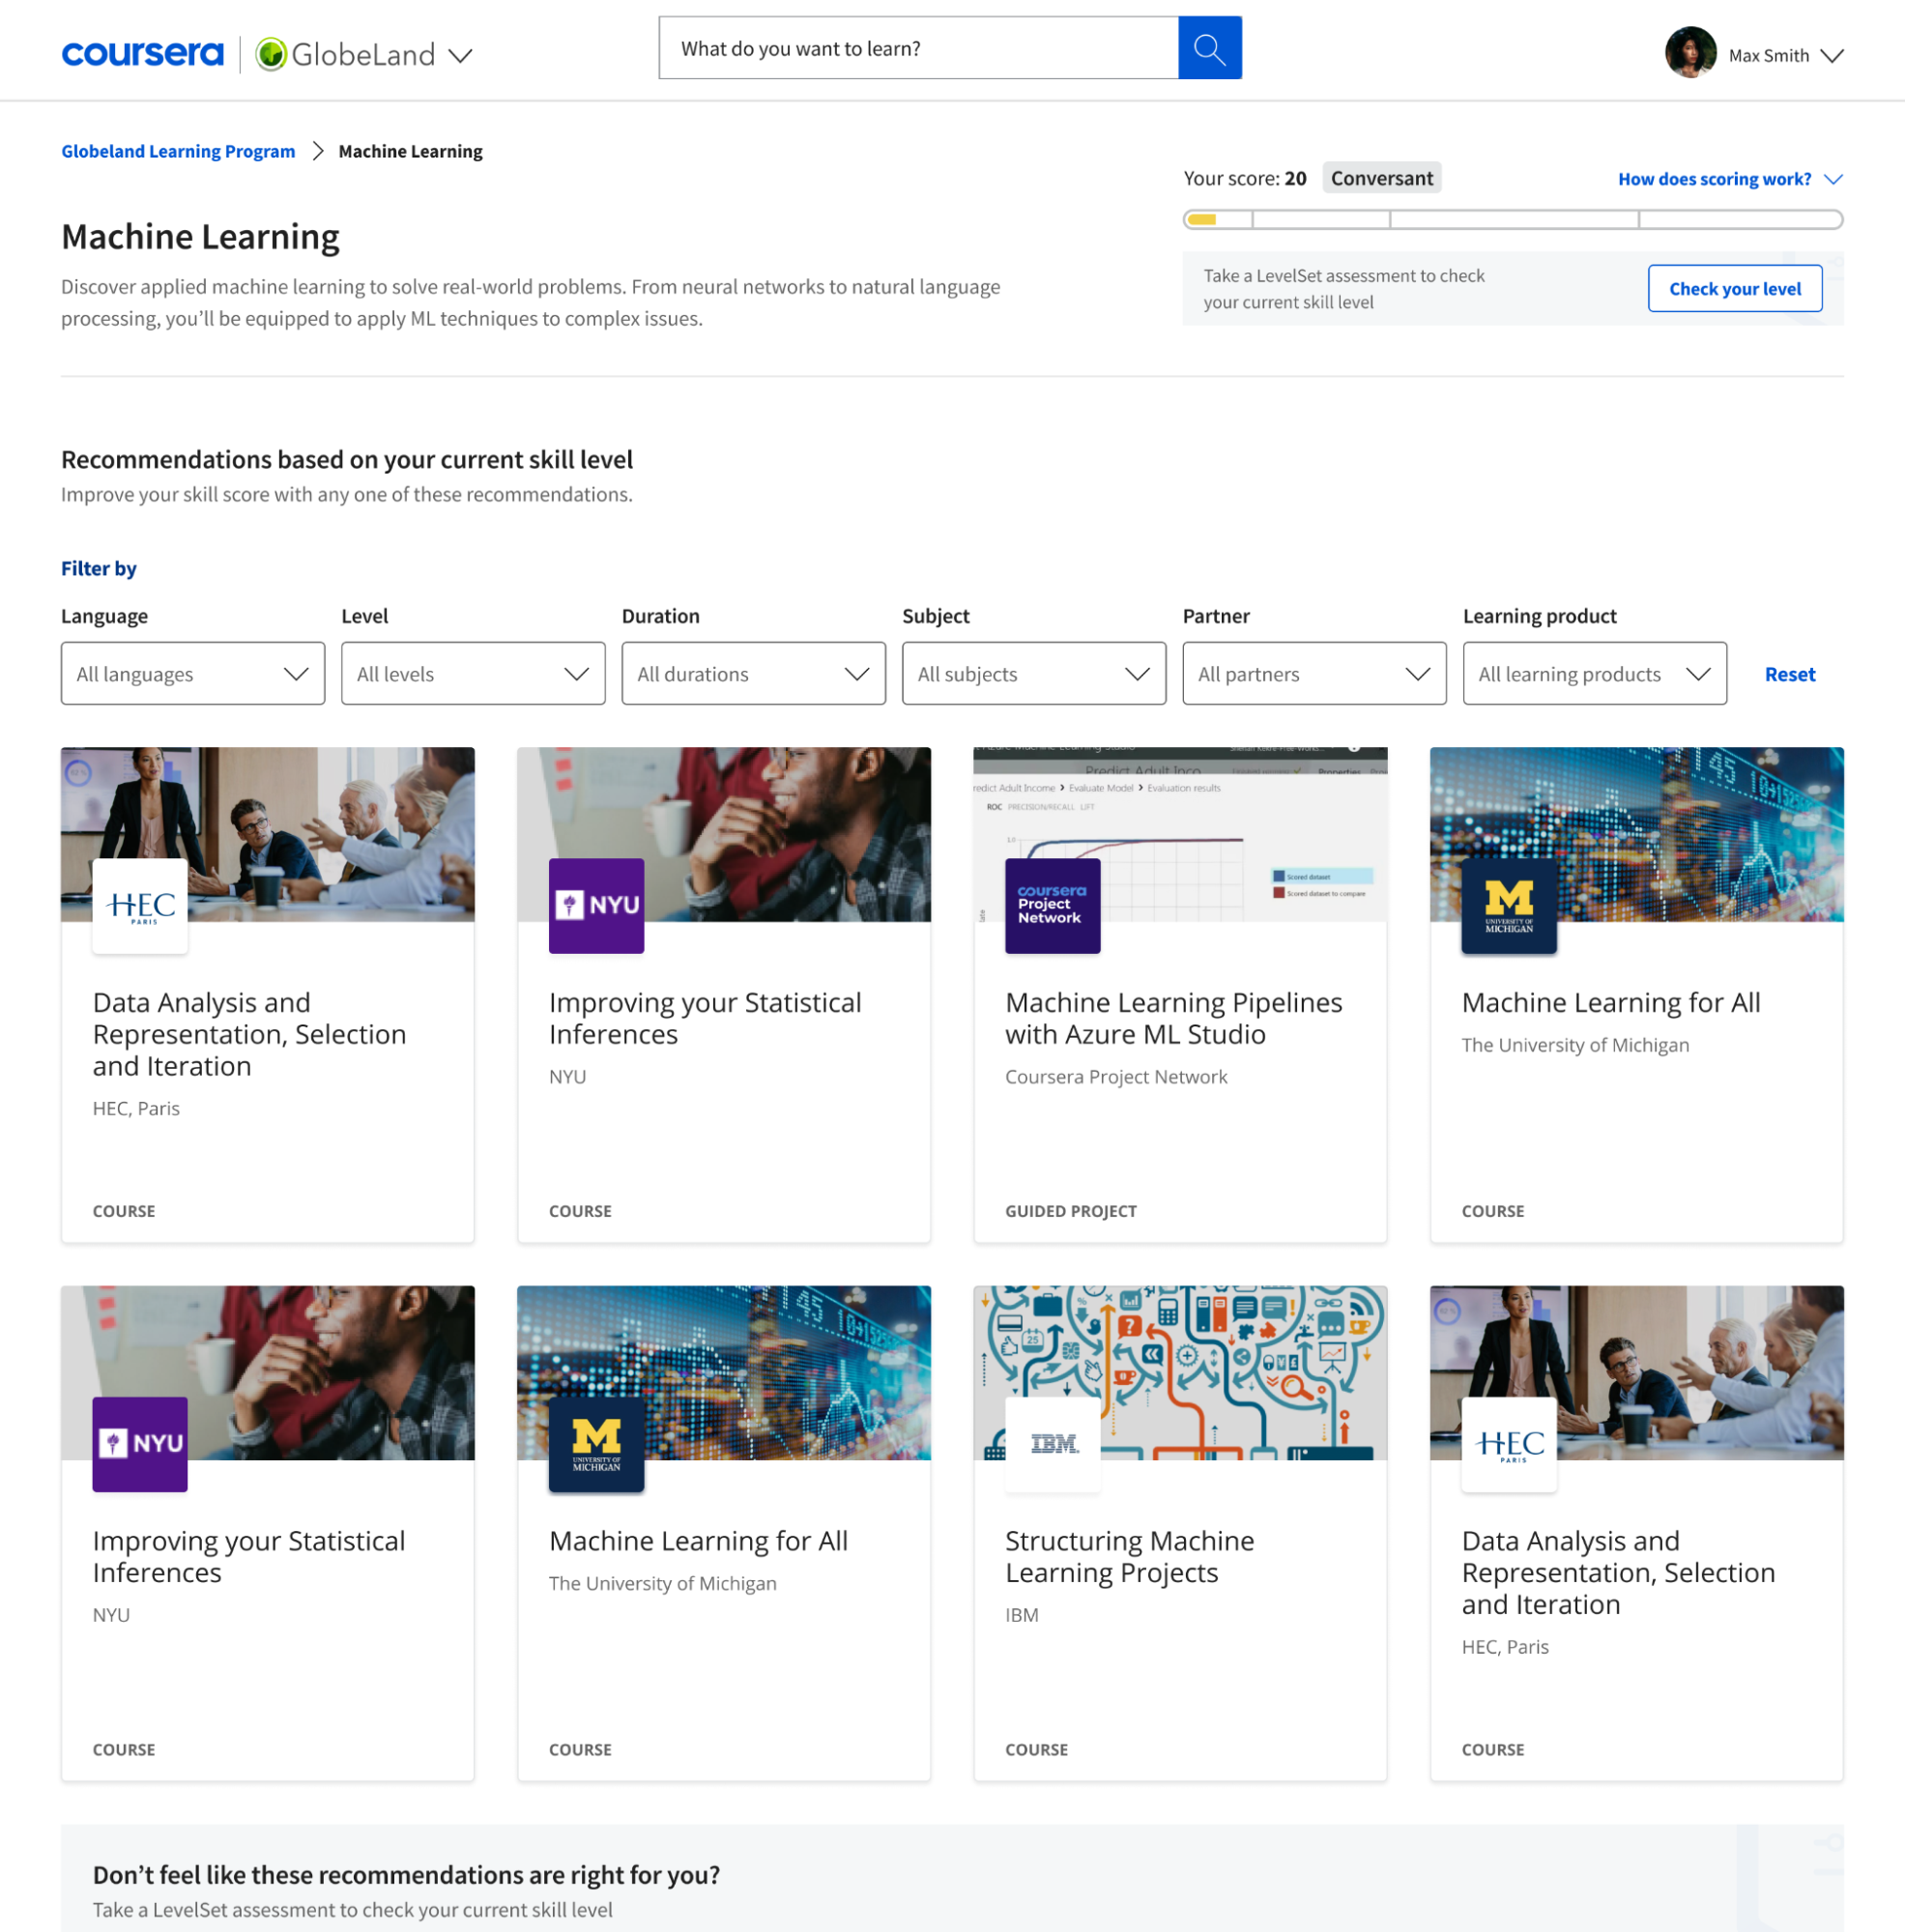 Skill pages provide learners with one place to receive skill-based content recommendations, take LevelSet assessments, and measure skill progress for more focused and efficient learning. Coursera offers over 300 skill pages across Business, Tech, and Data